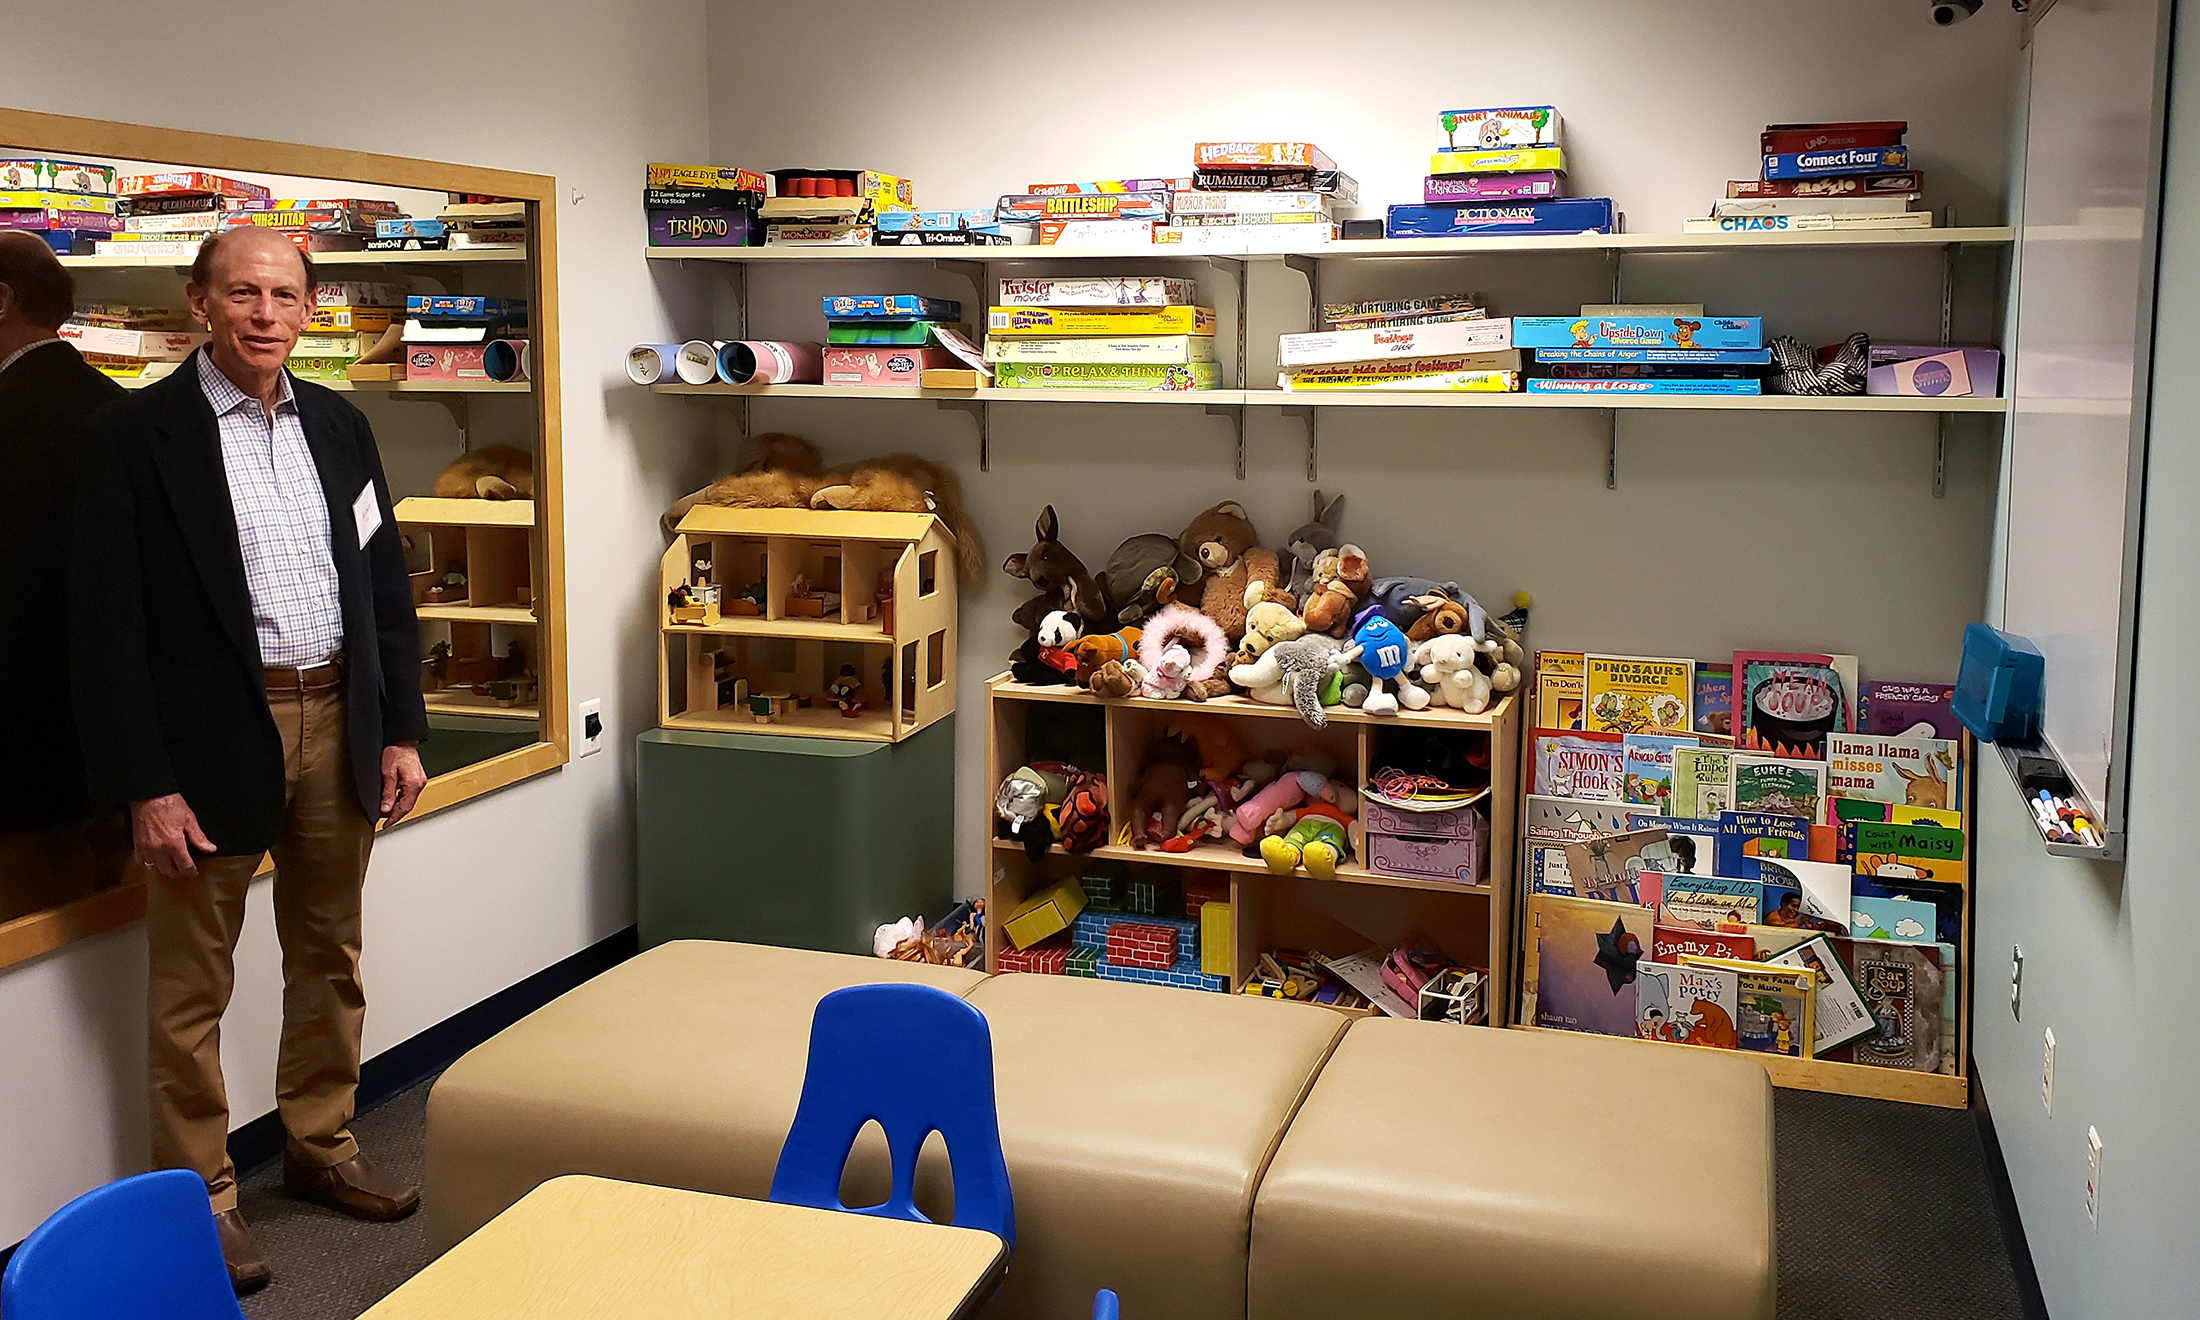 Dr. Robert S. Fink Play Therapy Room Dedication